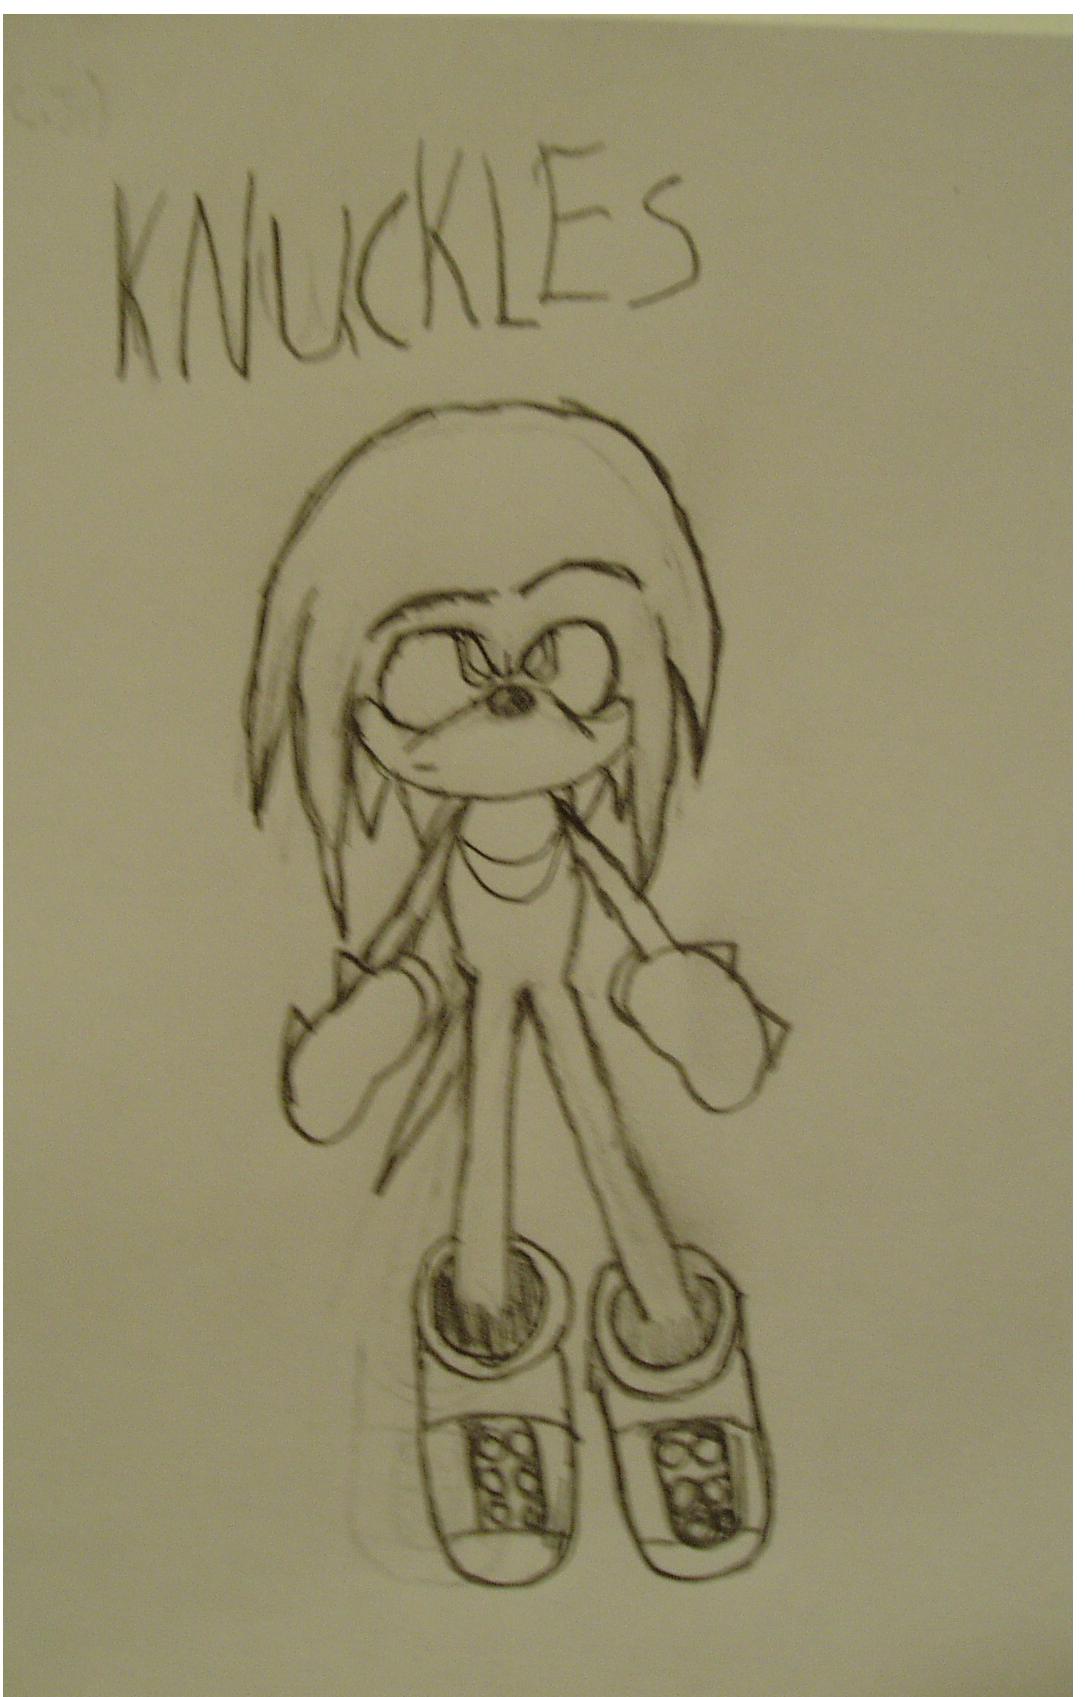 Knuckles(uncolored) by nights_the_hedgehog